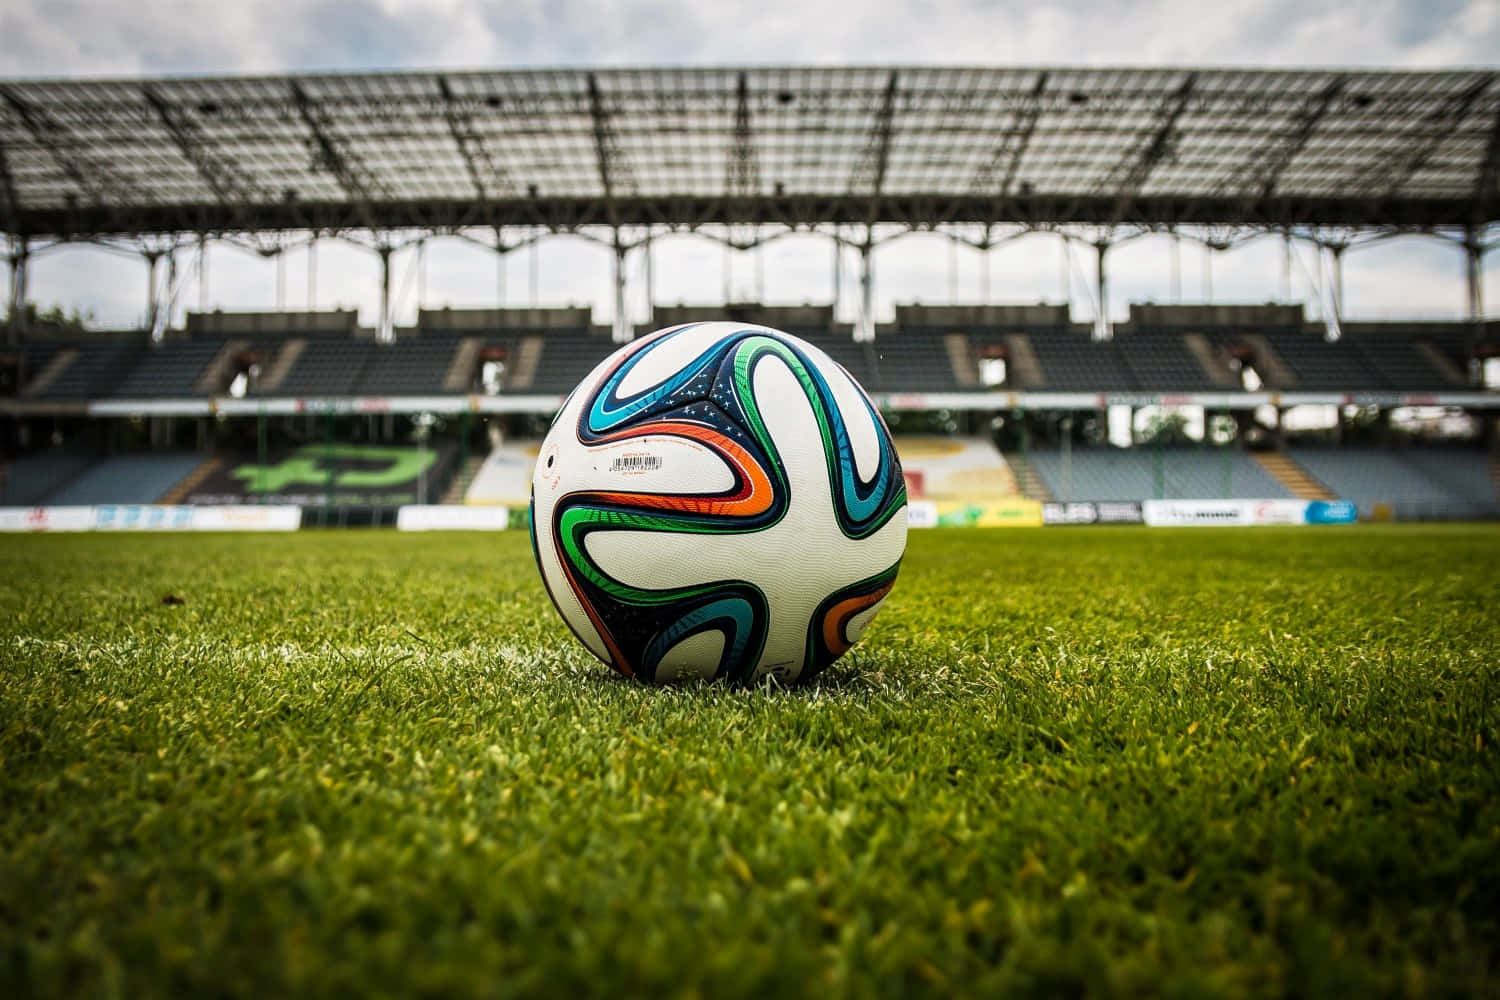 A soccer ball lies on a grassy field, ready for kick-off.